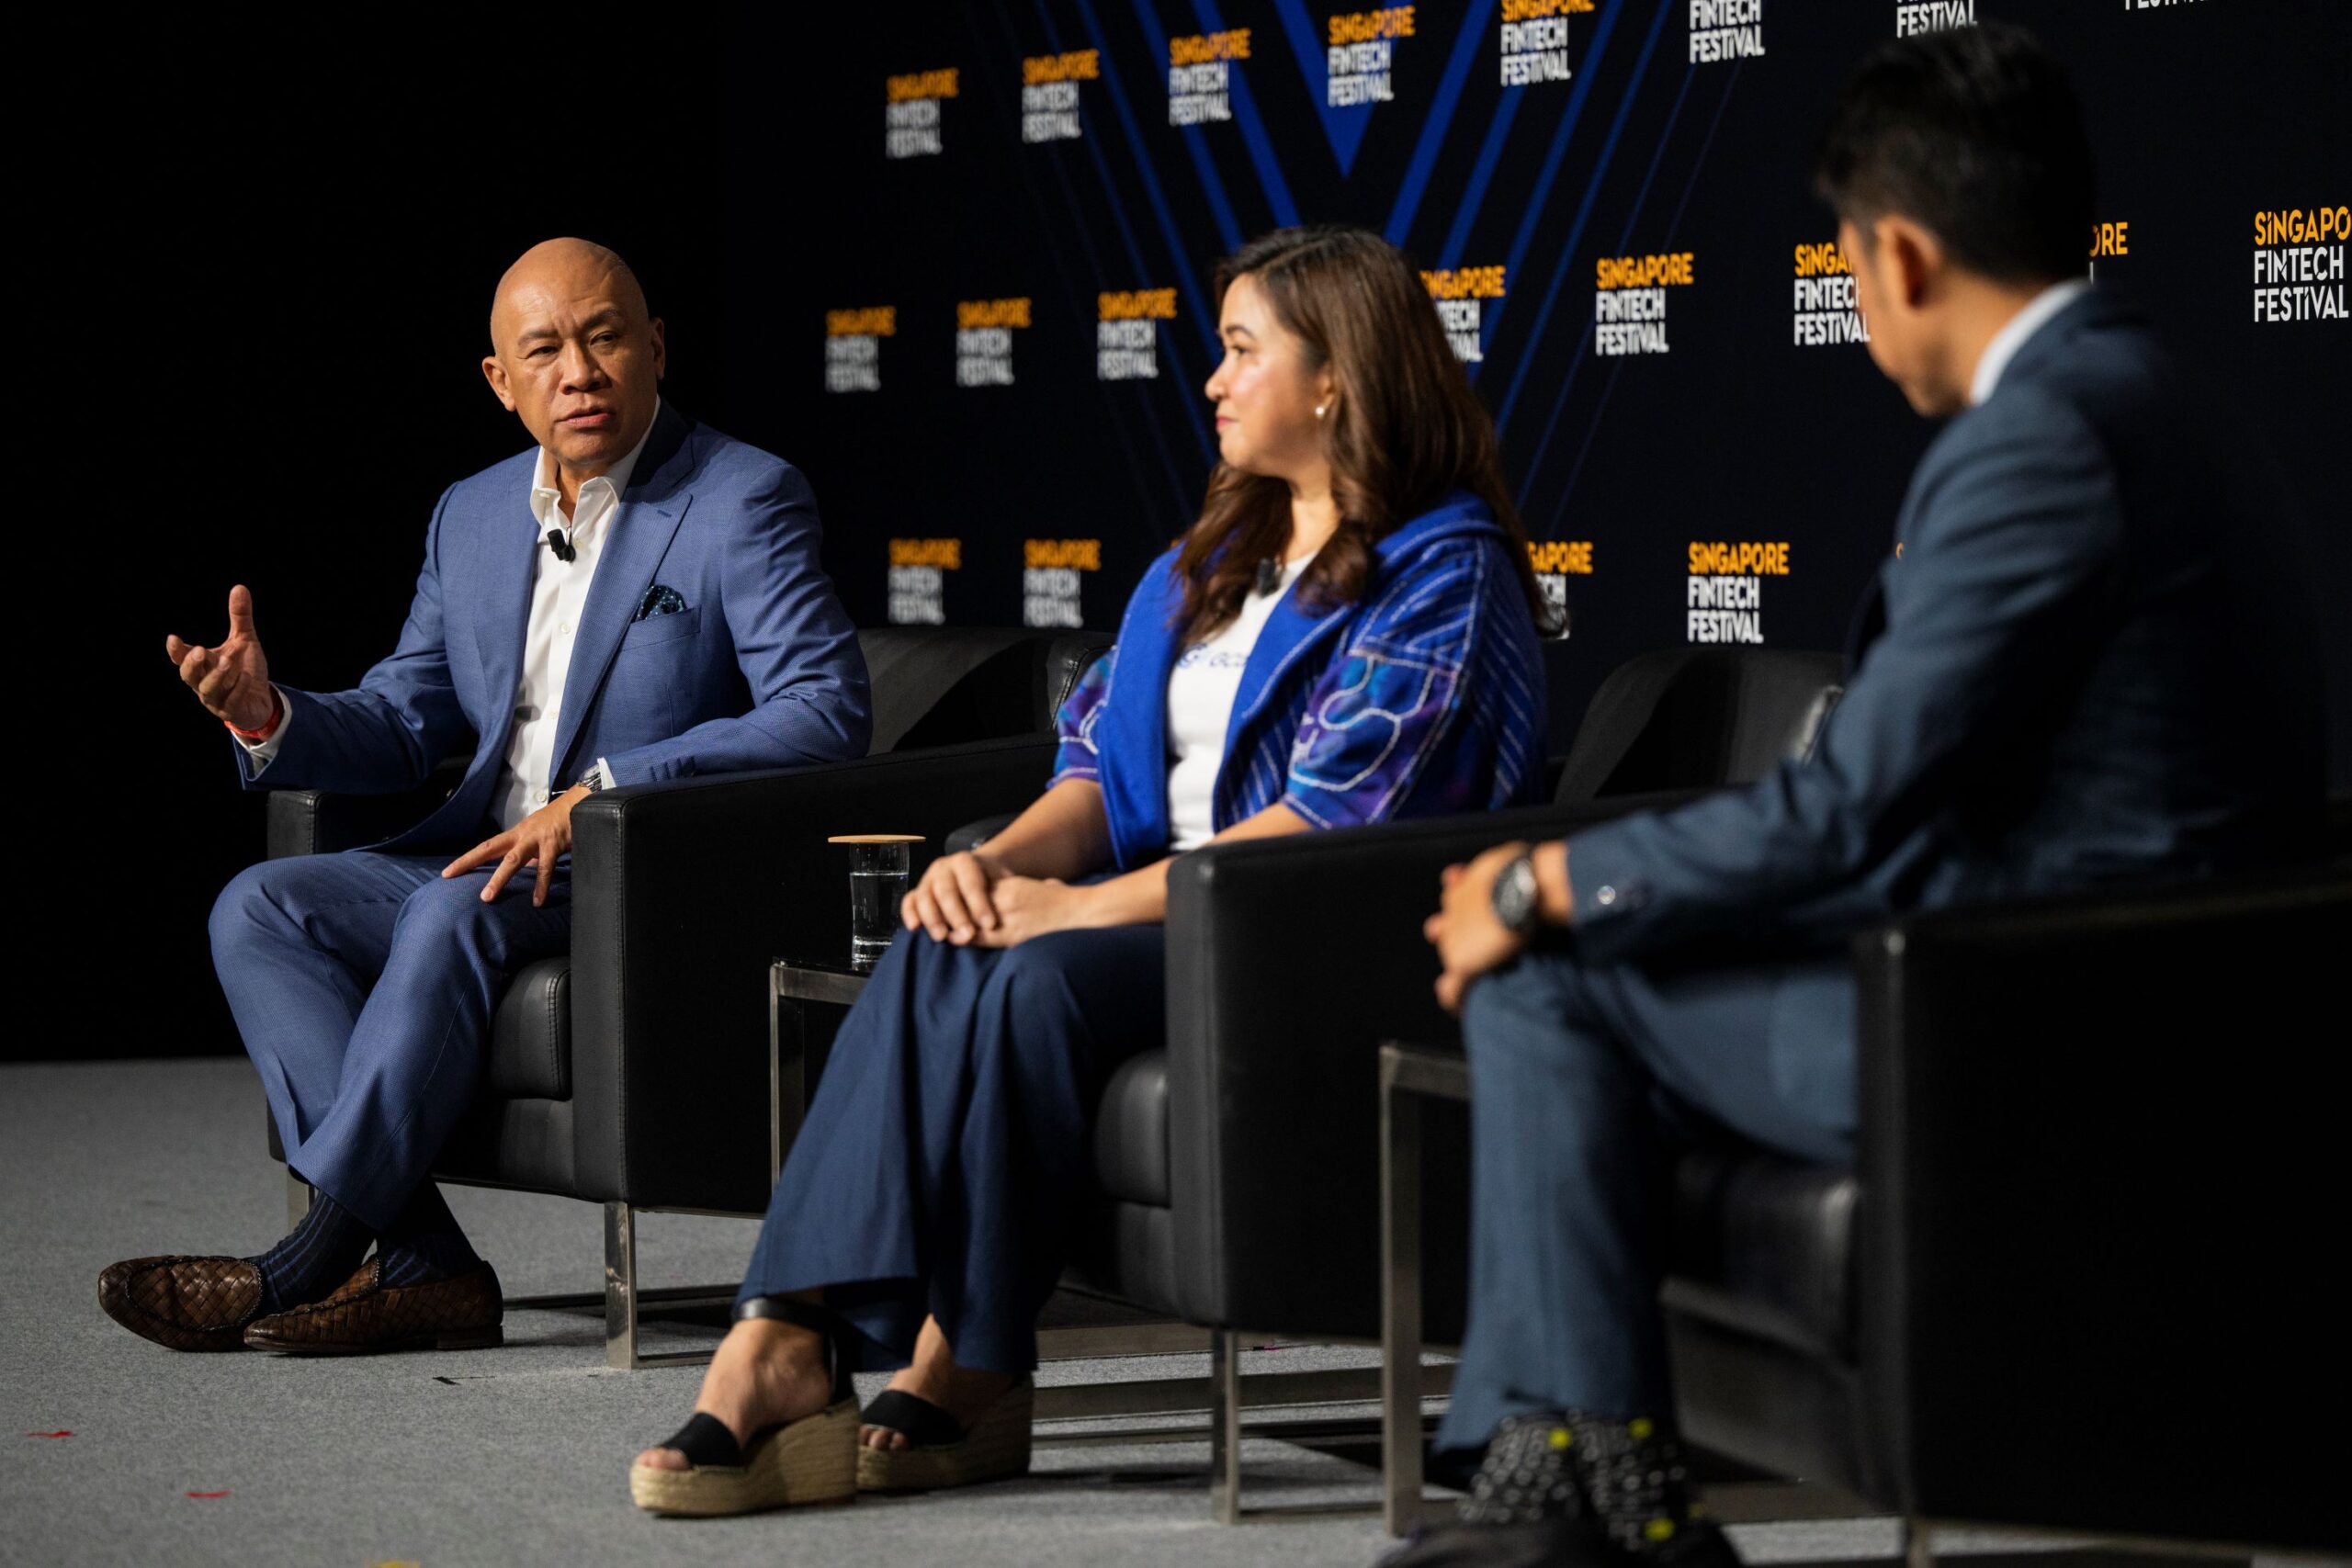 Globe Group President and CEO Ernest Cu speaks about raising unicorns in a panel discussion at the Singapore Fintech Festival, November 15, 2023. Beside him is Martha Sazon, President and CEO of Globe affiliate GCash, the country's No. 1 Finance App and only double unicorn. (Photo via SFF)